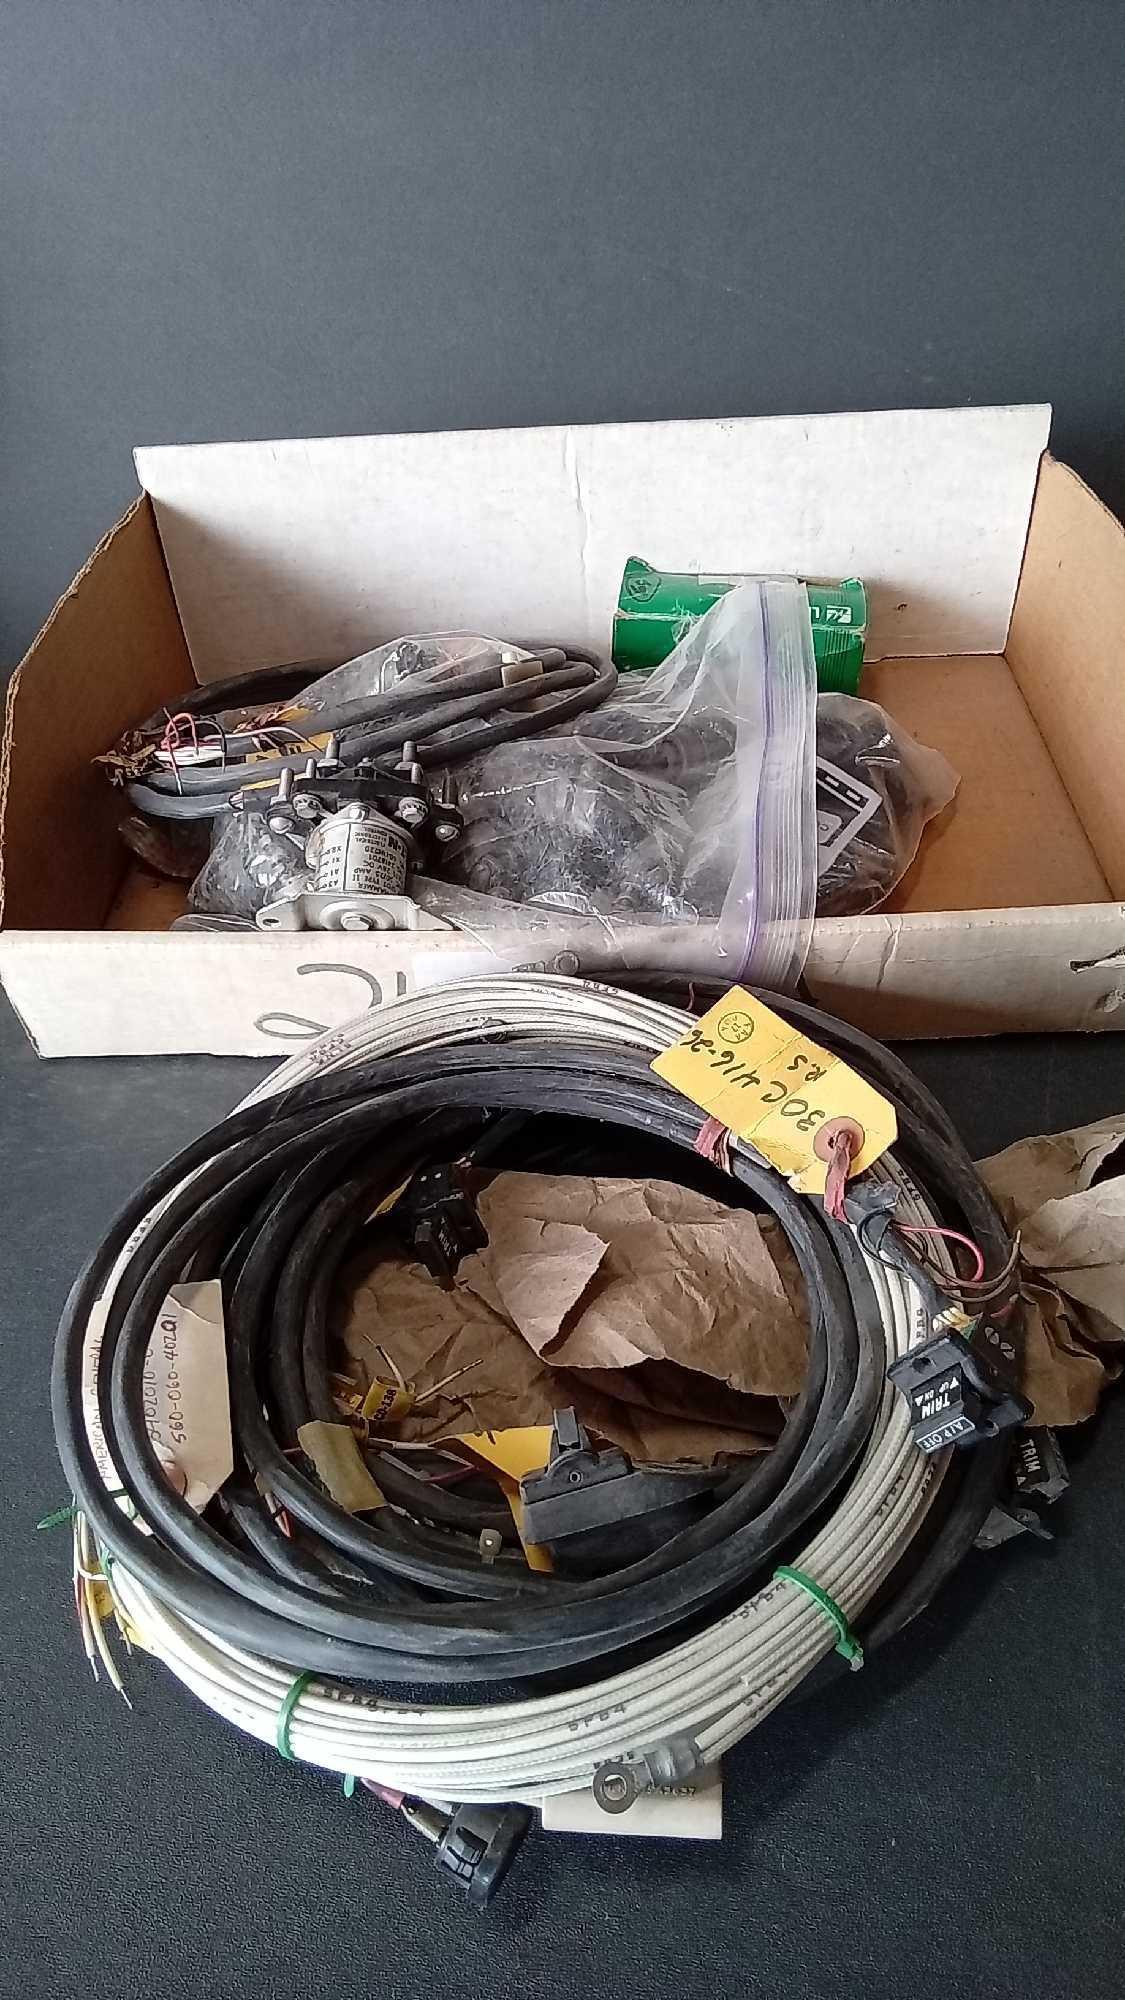 BOXES OF POWER SUPPLIES, NEW RELAYS, CINCH CONNECTORS & ELECTRICAL EXPENDABLES